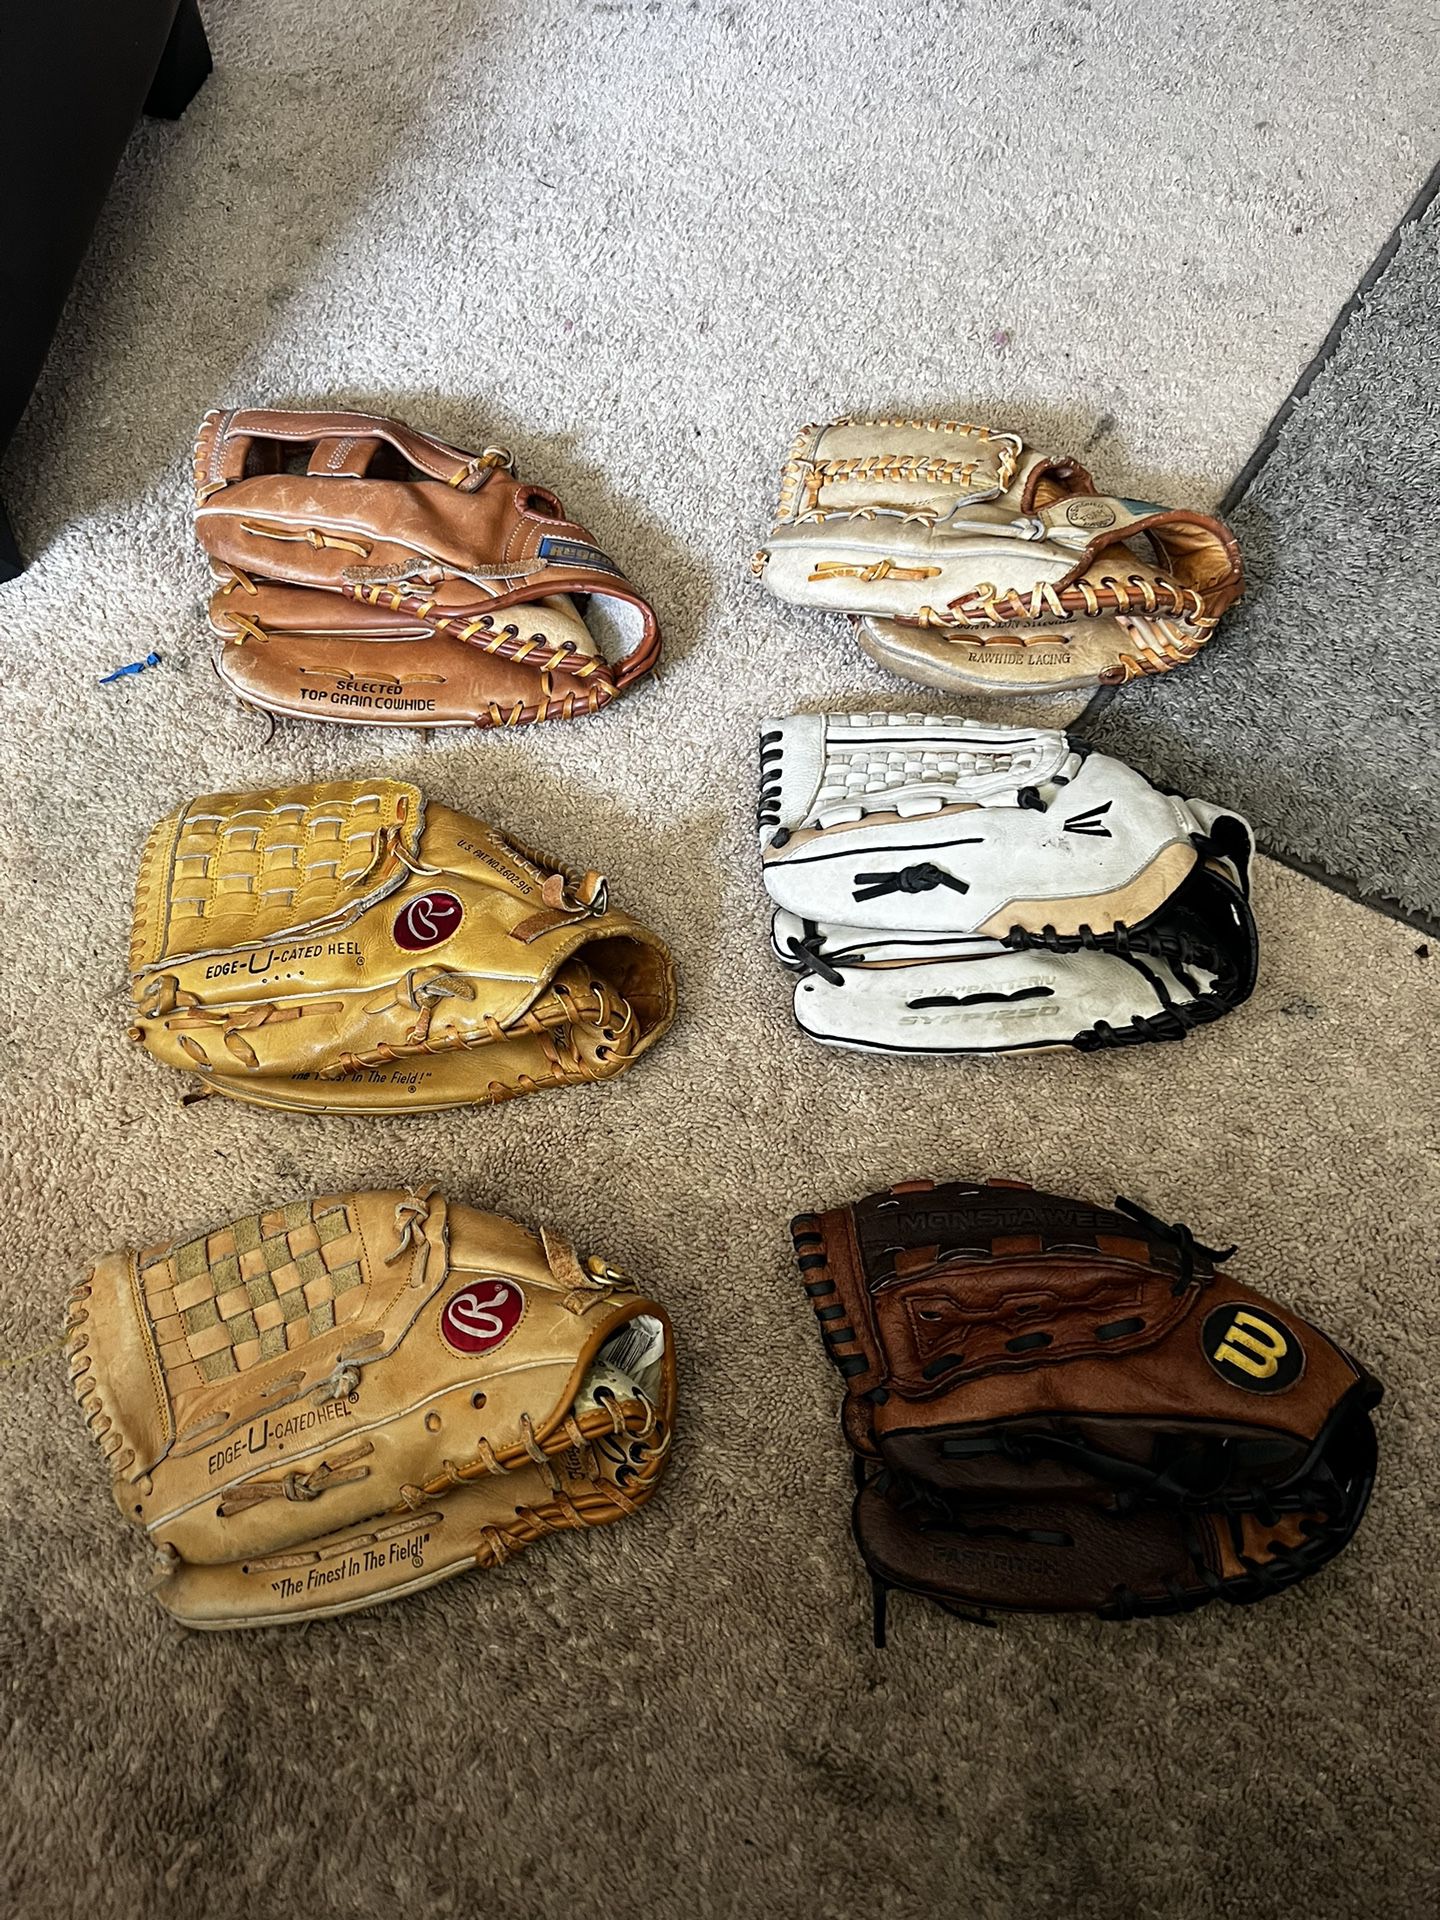 Left Handed Thrower Baseball And Softball Gloves Lefty LHT Have Righty Too Leather Rawlings Adult Gloves Regents Hustler Easton Wilson Youth Etc